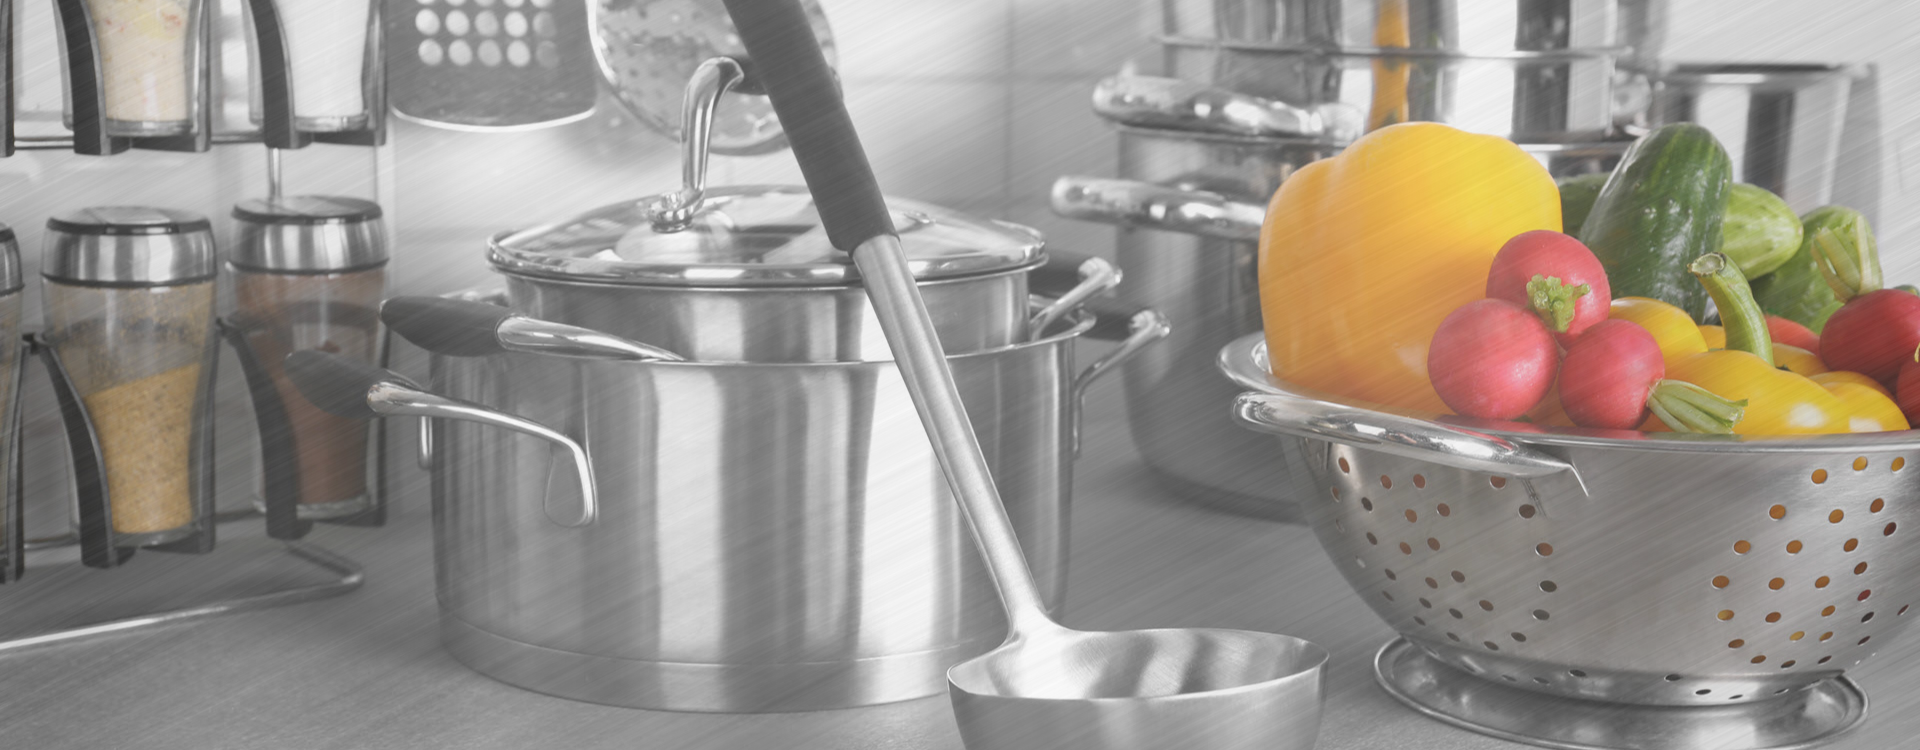 Groupe SEB - stainless steel pots, strainer and ladle